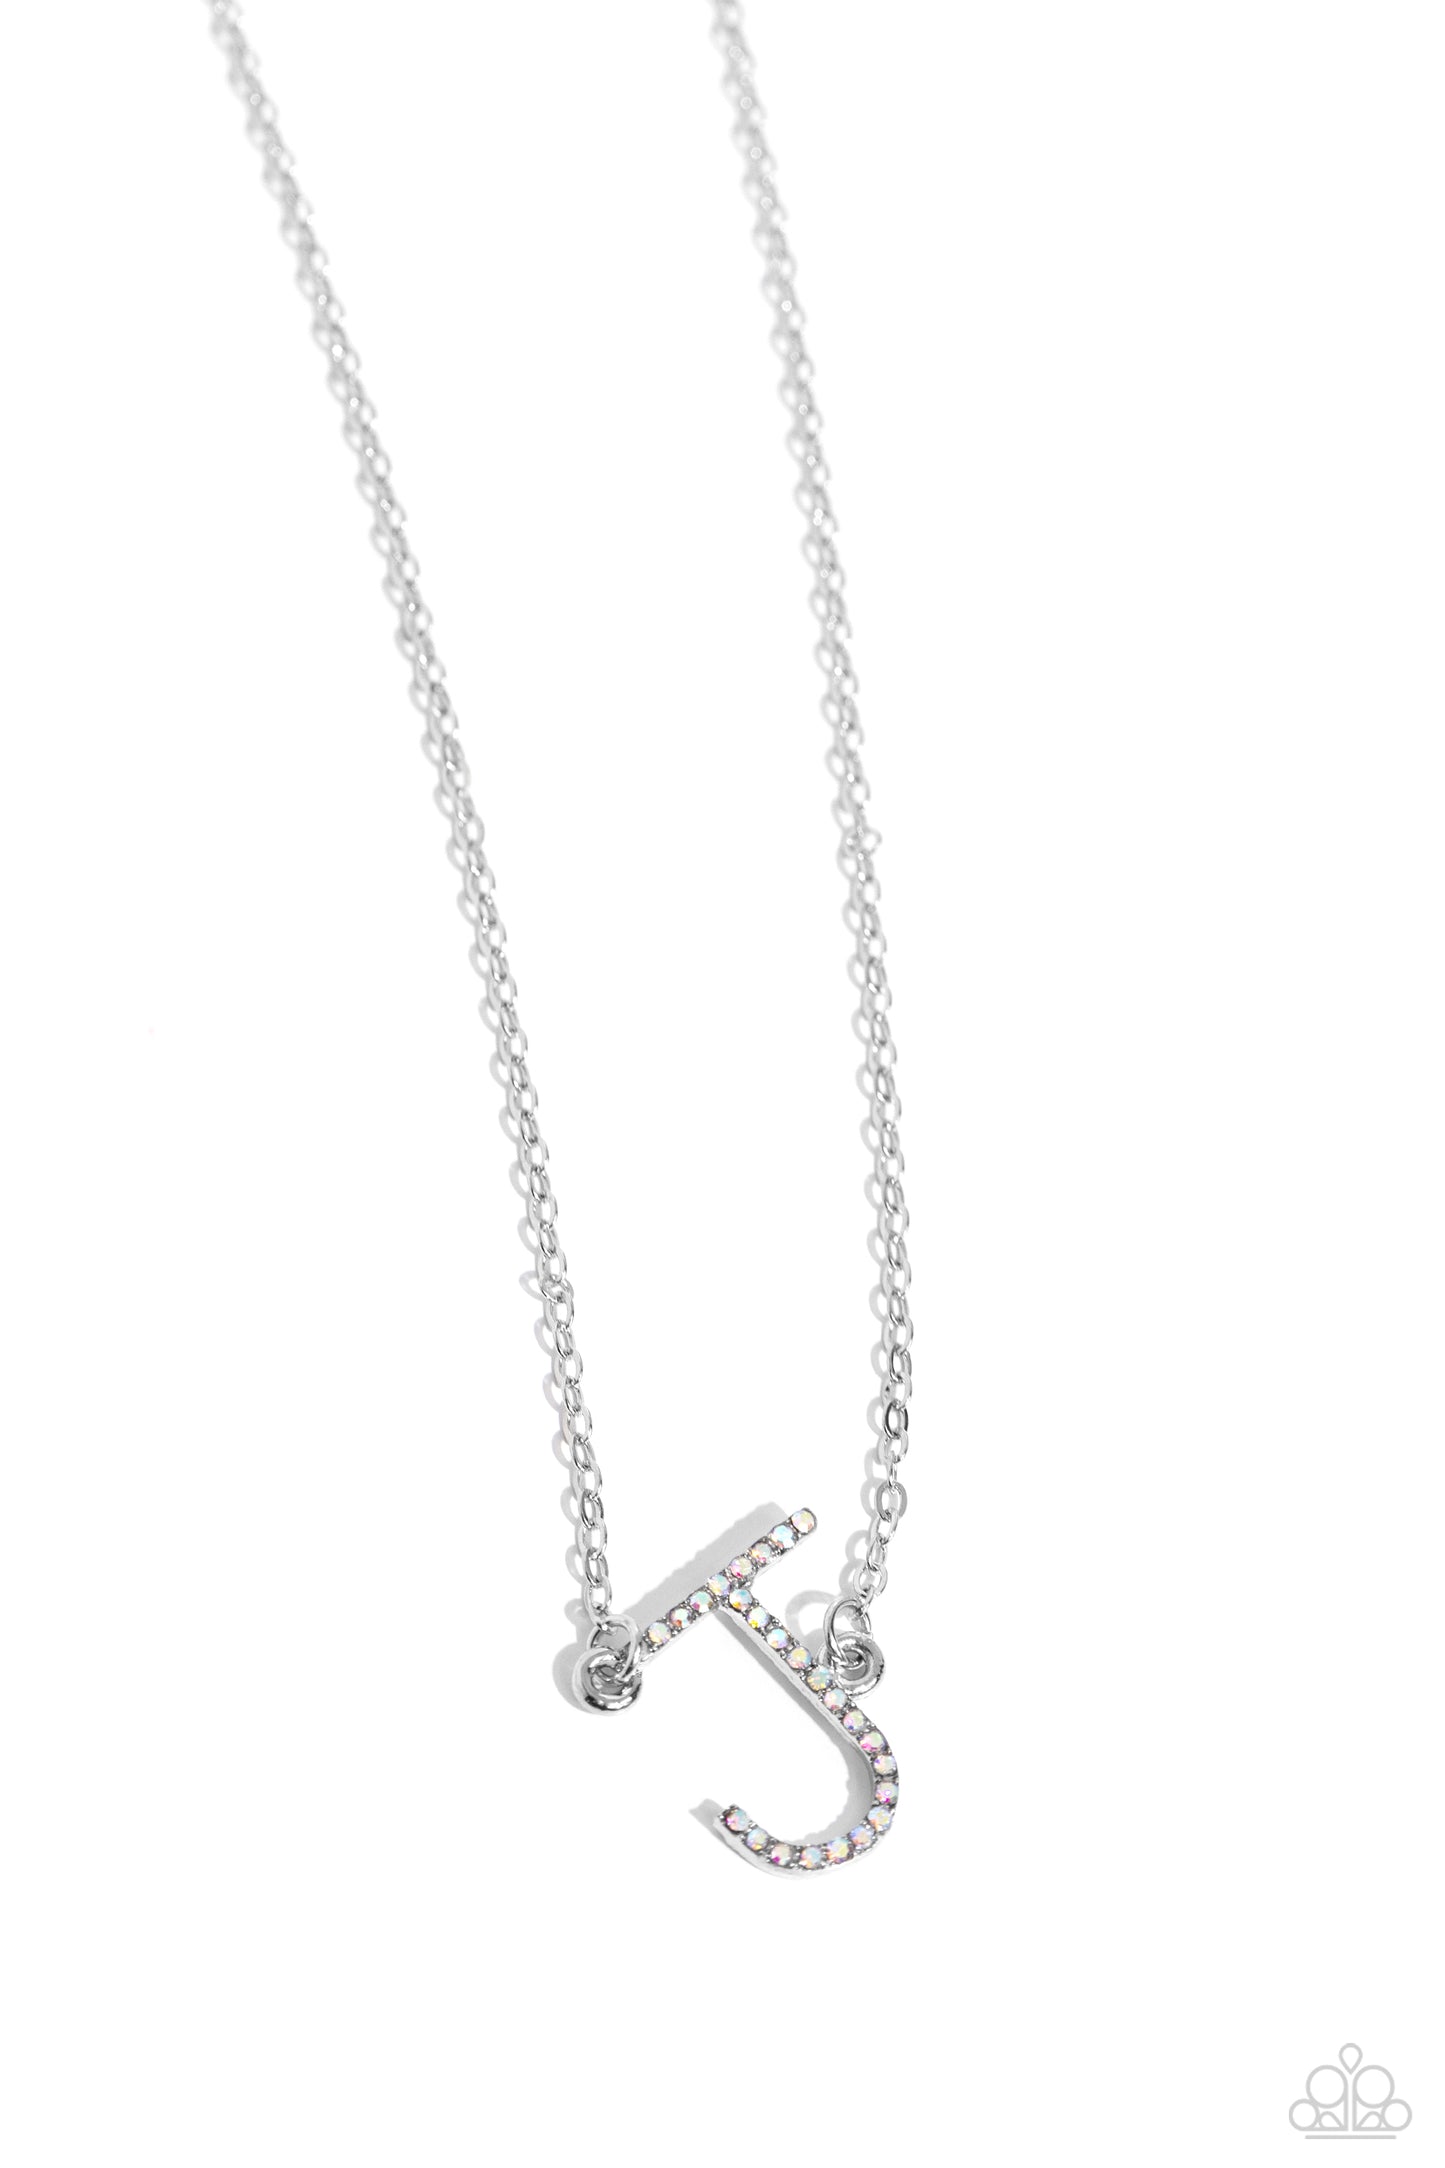 INITIALLY Yours Multi "J" Necklace - Paparazzi Accessories  Embossed with dainty iridescent rhinestones, a silver letter "J" hovers below the collar from a dainty silver chain, for a sentimentally simple design. Features an adjustable clasp closure. Due to its prismatic palette, color may vary.  Sold as one individual necklace. Includes one pair of matching earrings.  P2DA-MTXX-133XX